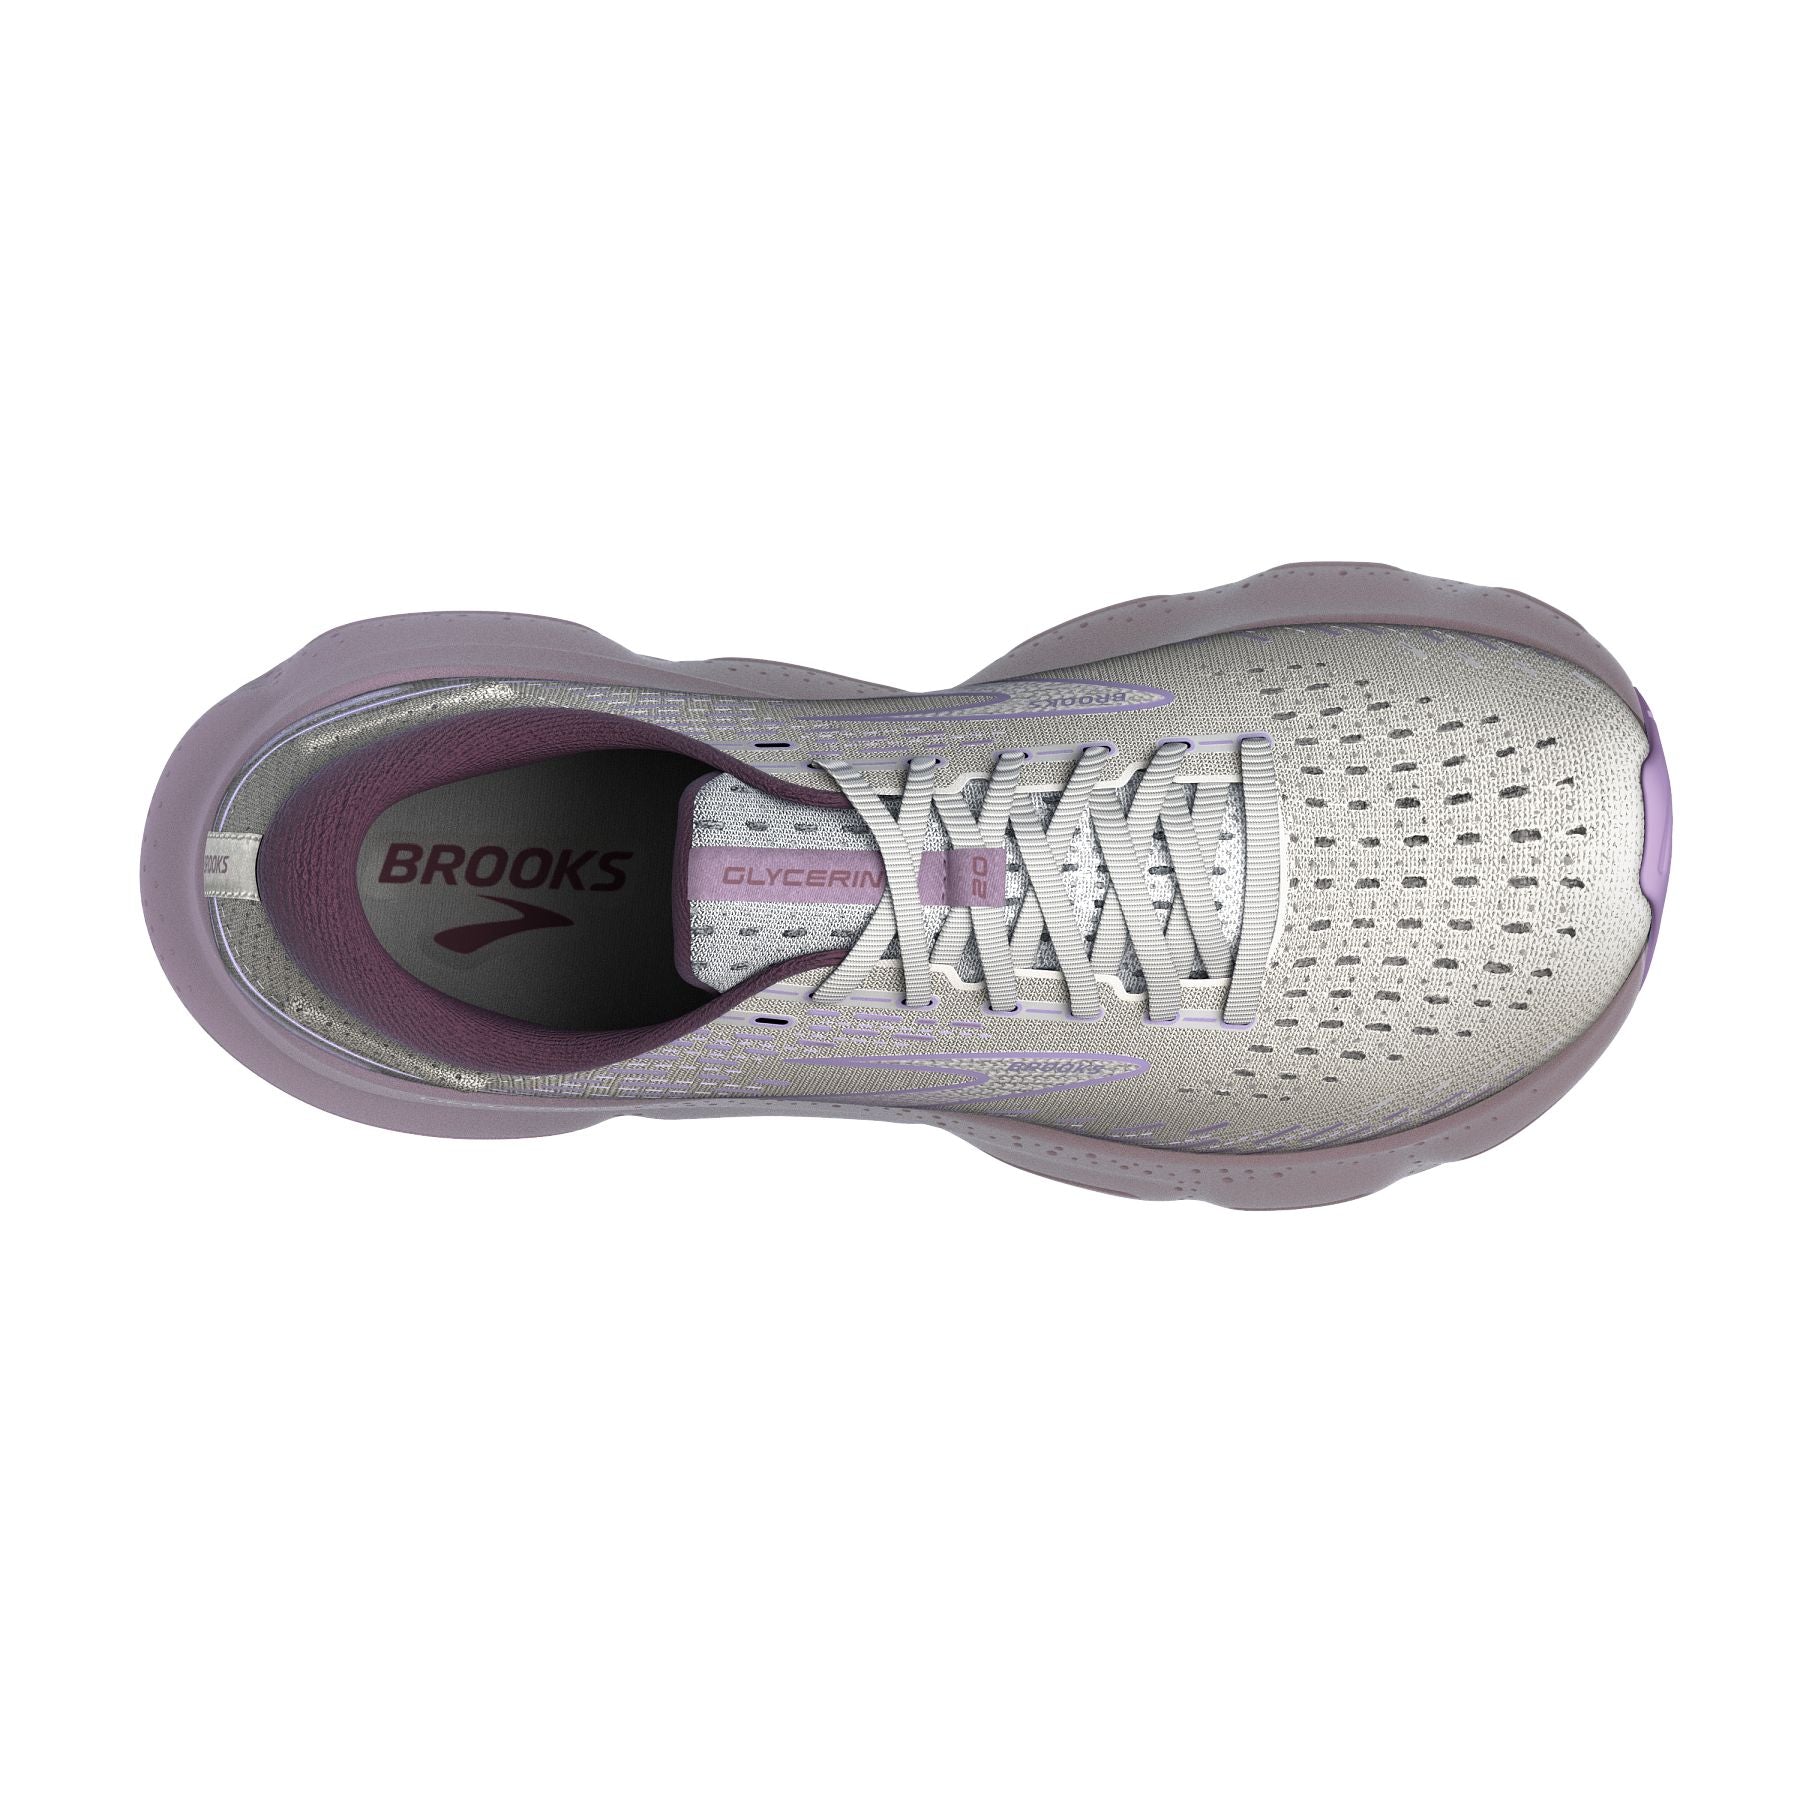 Top view of the Women's Glycerin 20 in White/Orchid Lavender